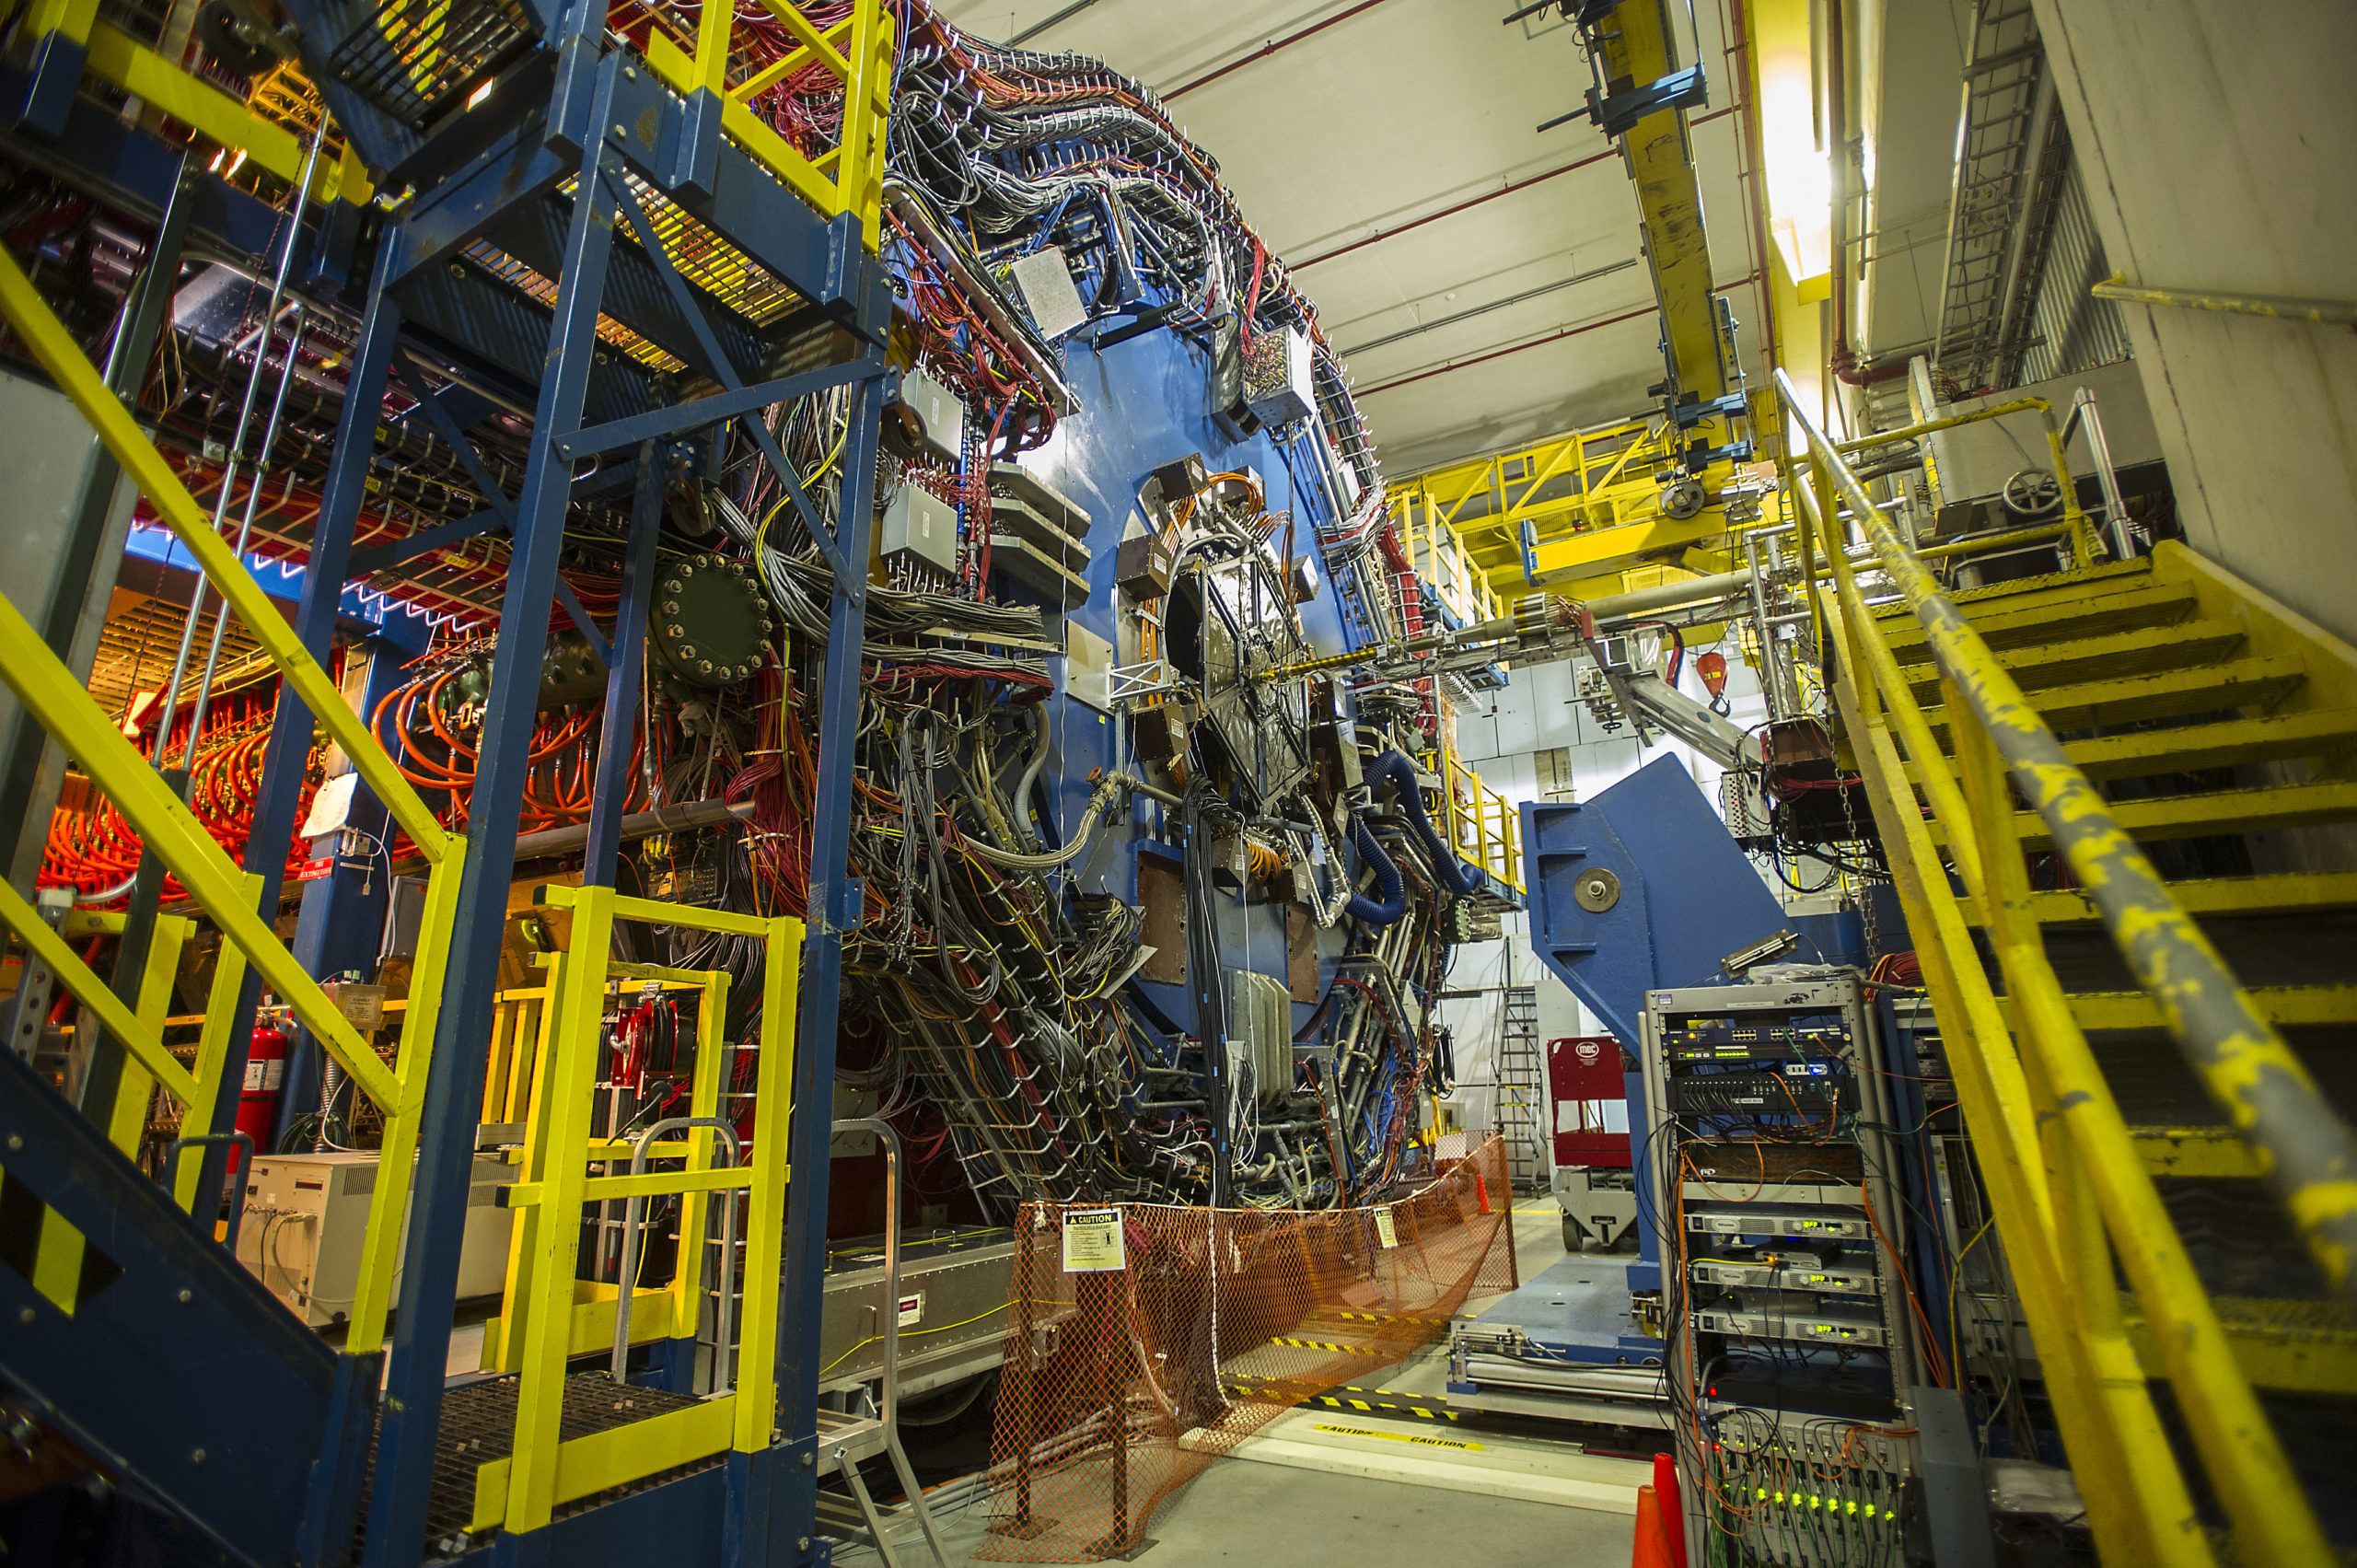 Image - The STAR detector at the U.S. Department of Energy's Brookhaven National Laboratory. (Credit: Brookhaven National Laboratory)